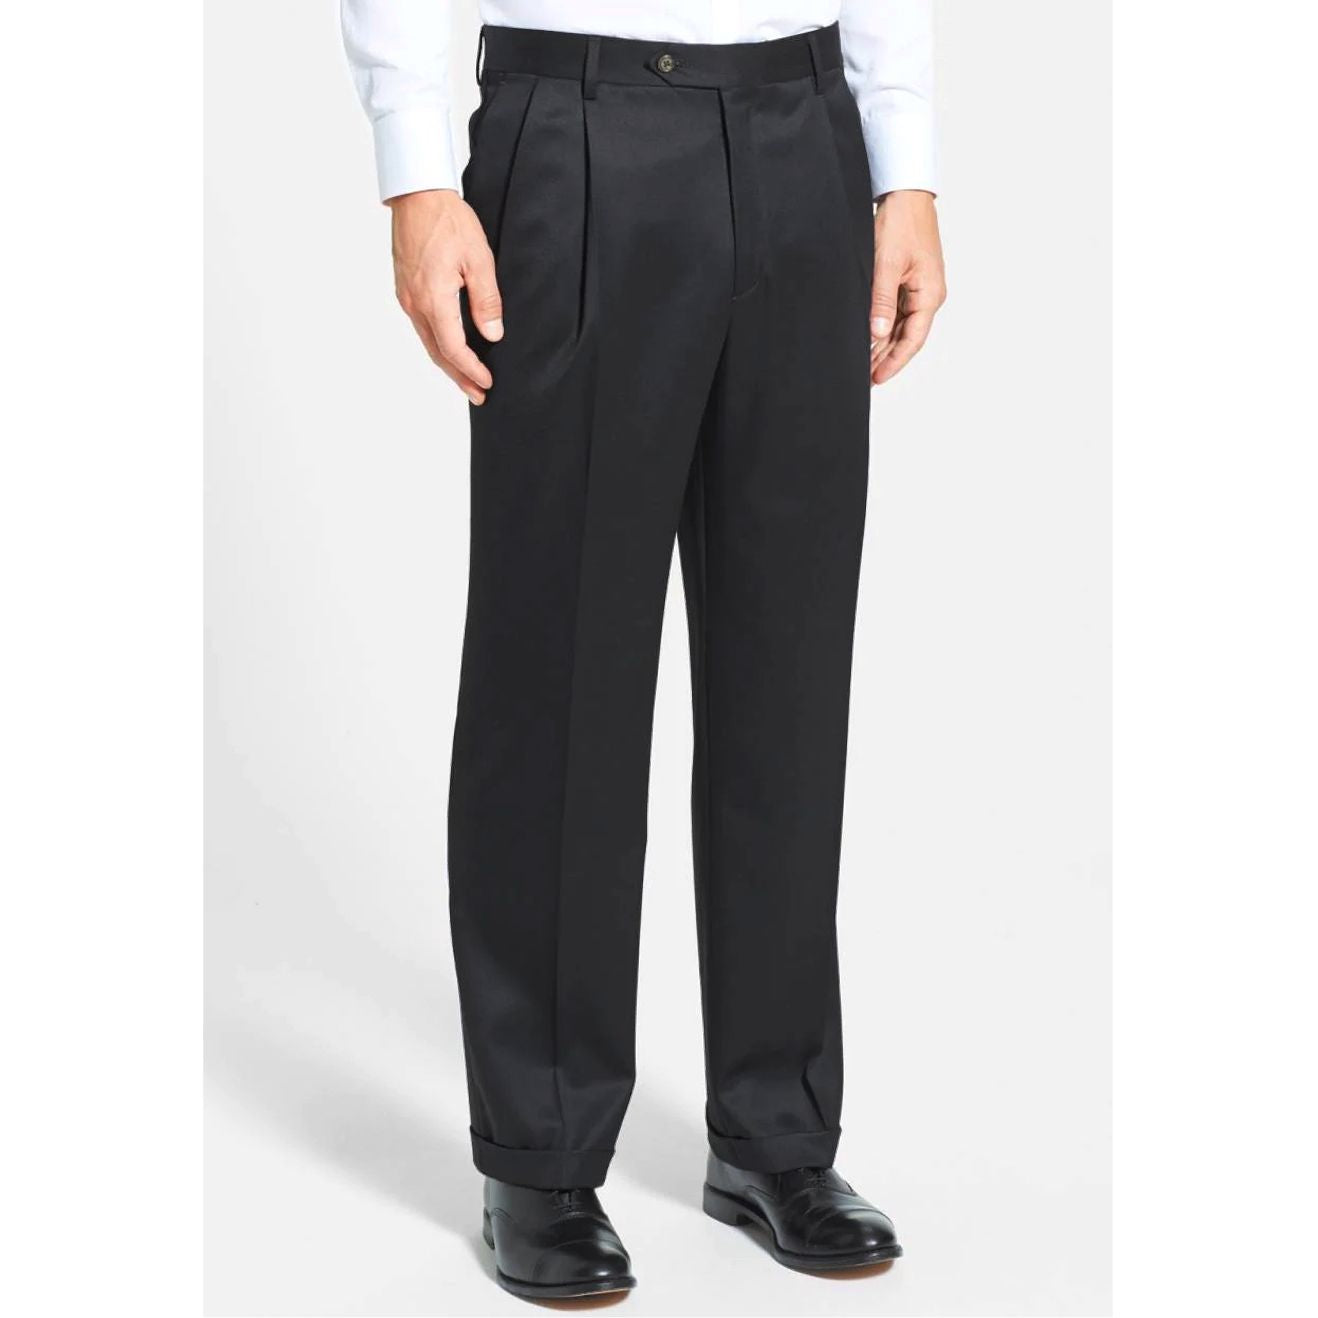 Super 100s Worsted Wool Gabardine Trouser in Black (Milan Double Reverse Pleated Fit - Regular & Long Rise) by Berle